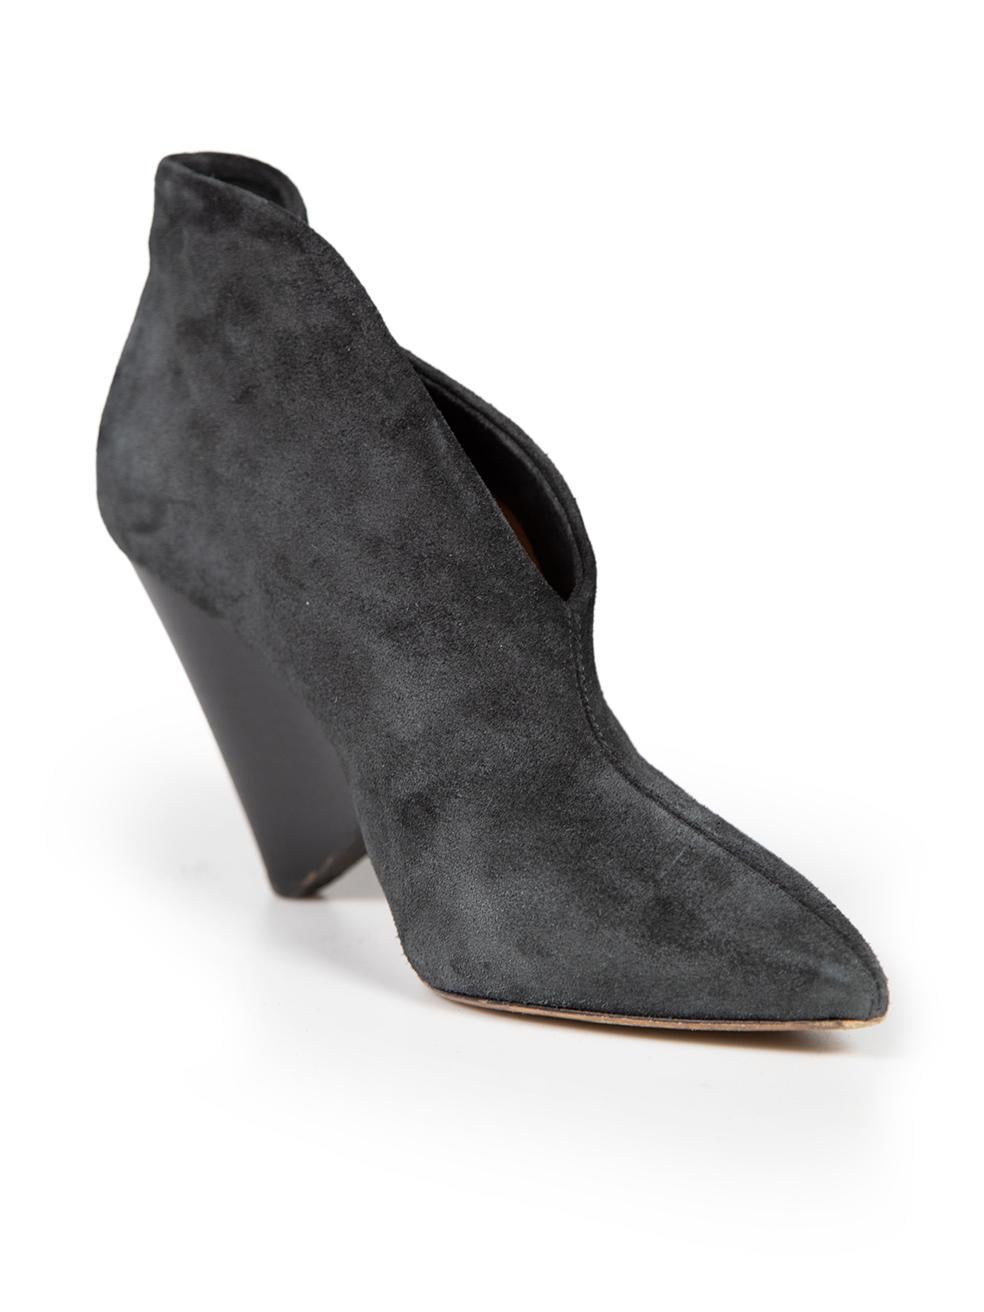 CONDITION is Very good. Minimal wear to boots is evident. Minimal abrasions to both heels and overall pilling to suede especially around the tip on this used Isabel Marant designer resale item.
 
 
 
 Details
 
 
 Black
 
 Suede
 
 Ankle boots
 
